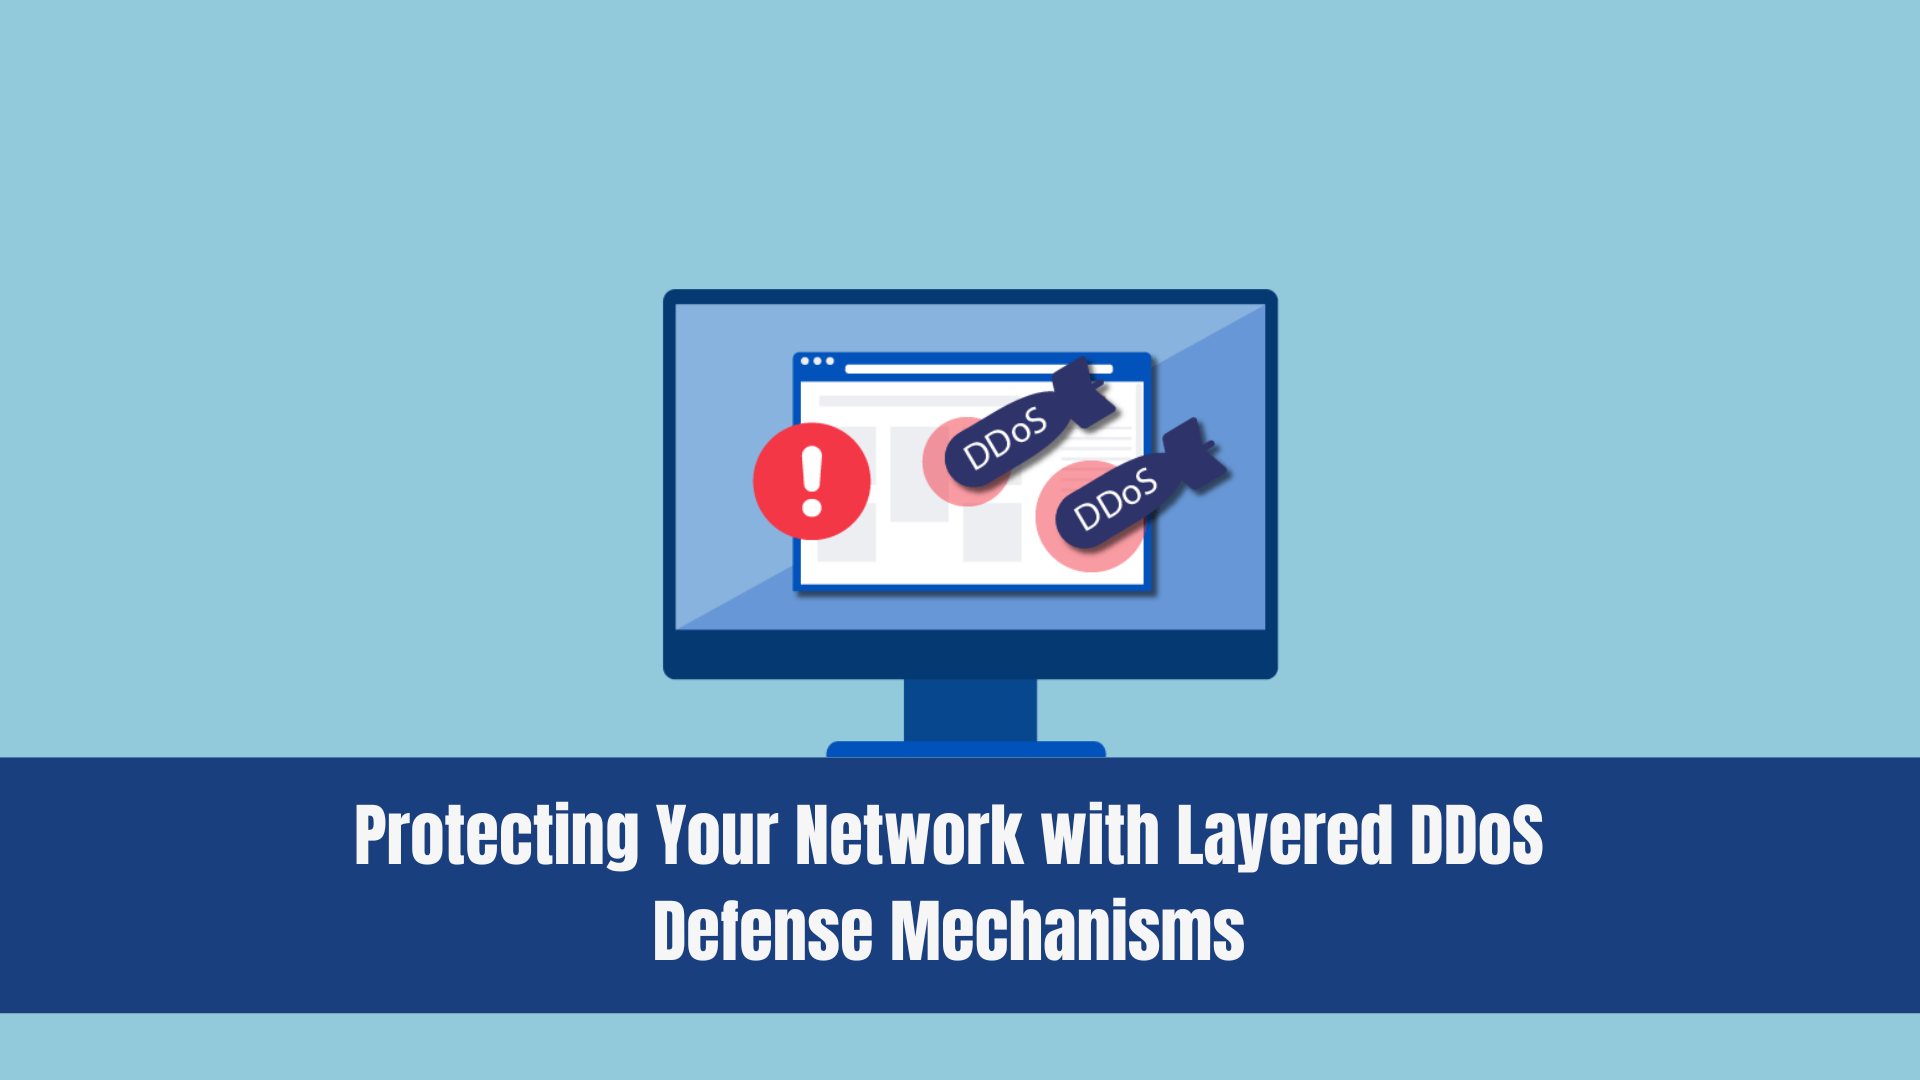 Protecting Your Network with Layered DDoS Defense Mechanisms